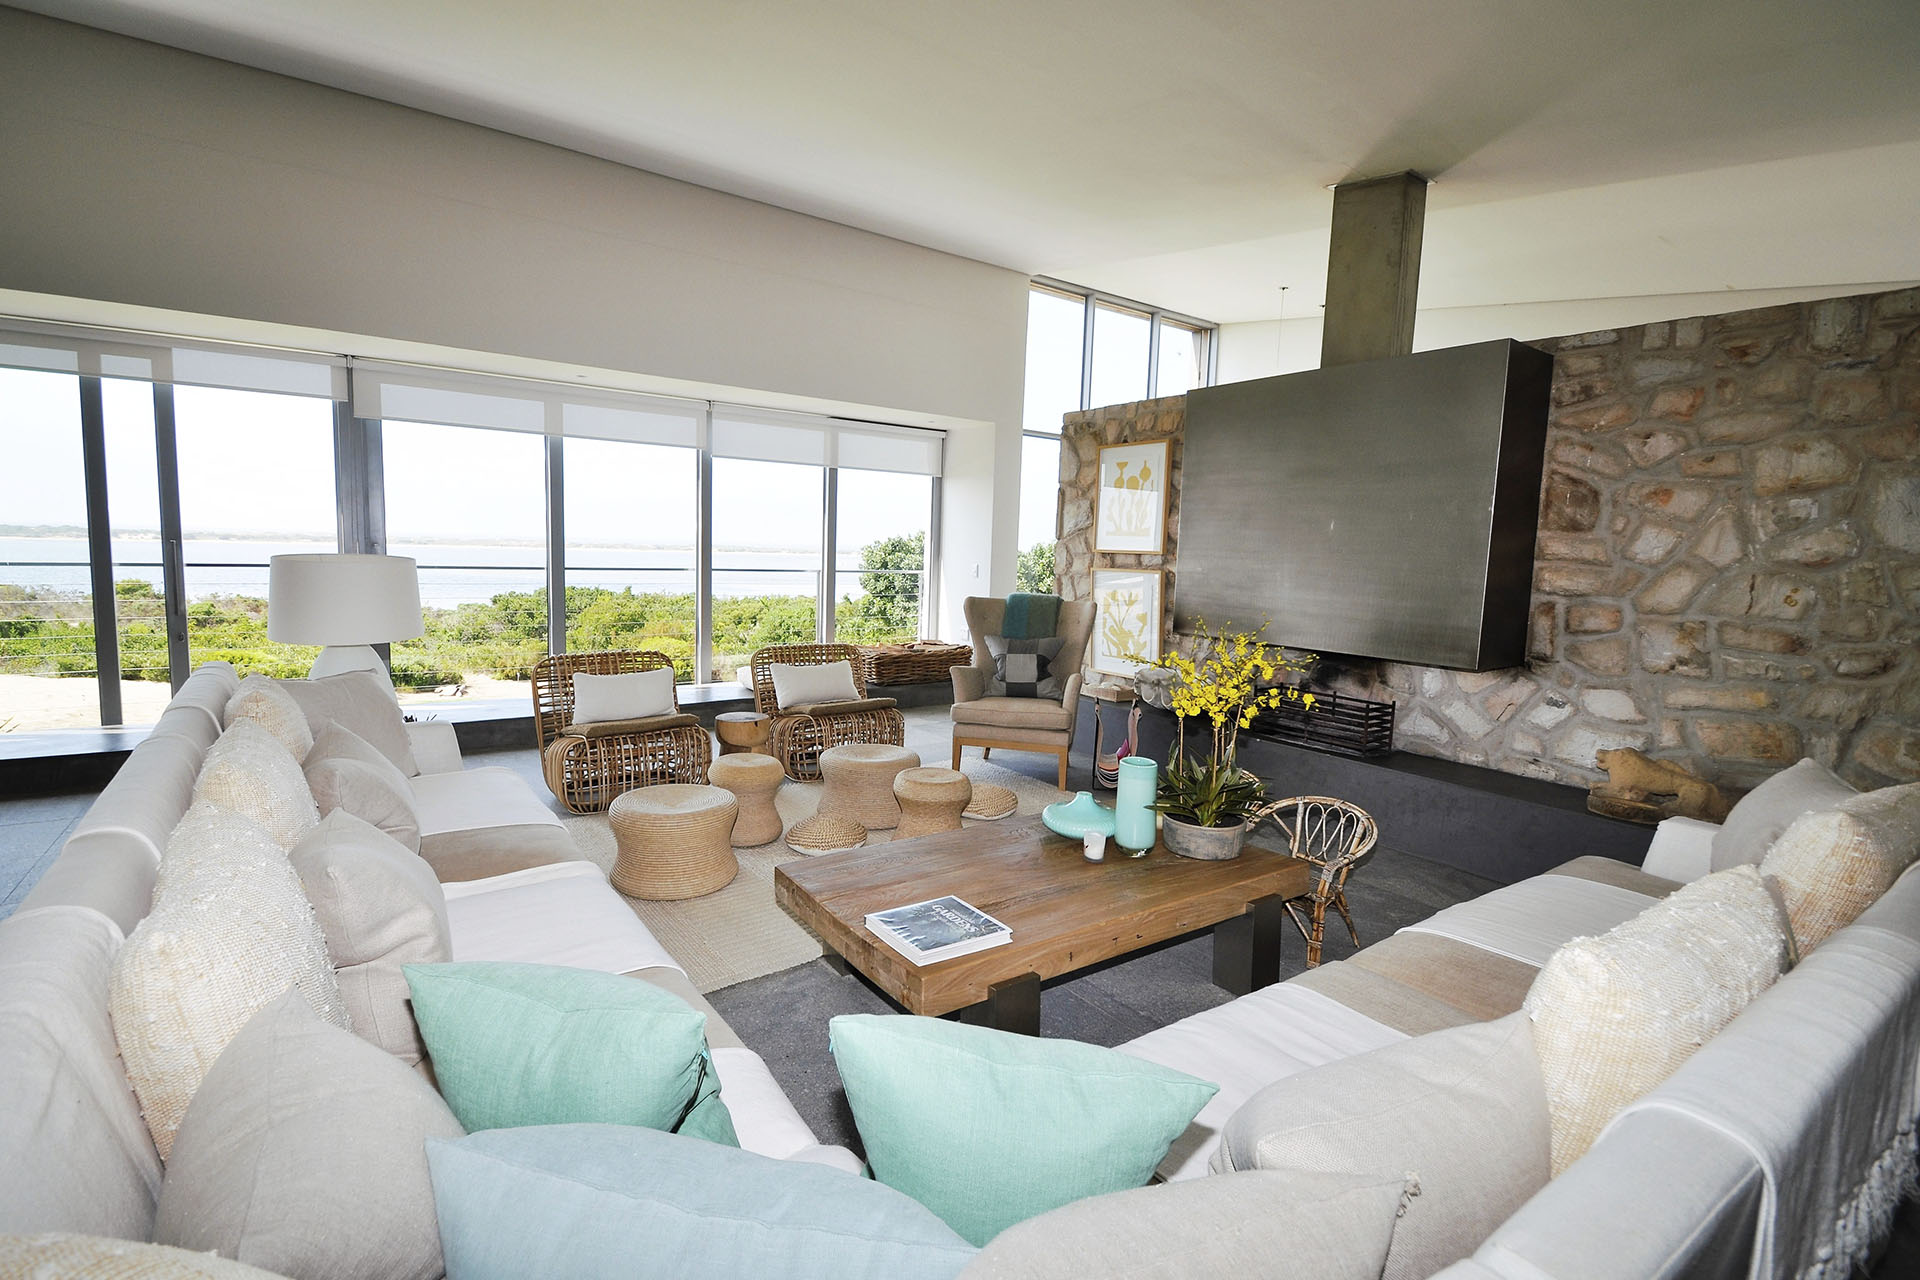 Photo 20 of The Dune House accommodation in Plettenberg Bay, Cape Town with 6 bedrooms and 7 bathrooms